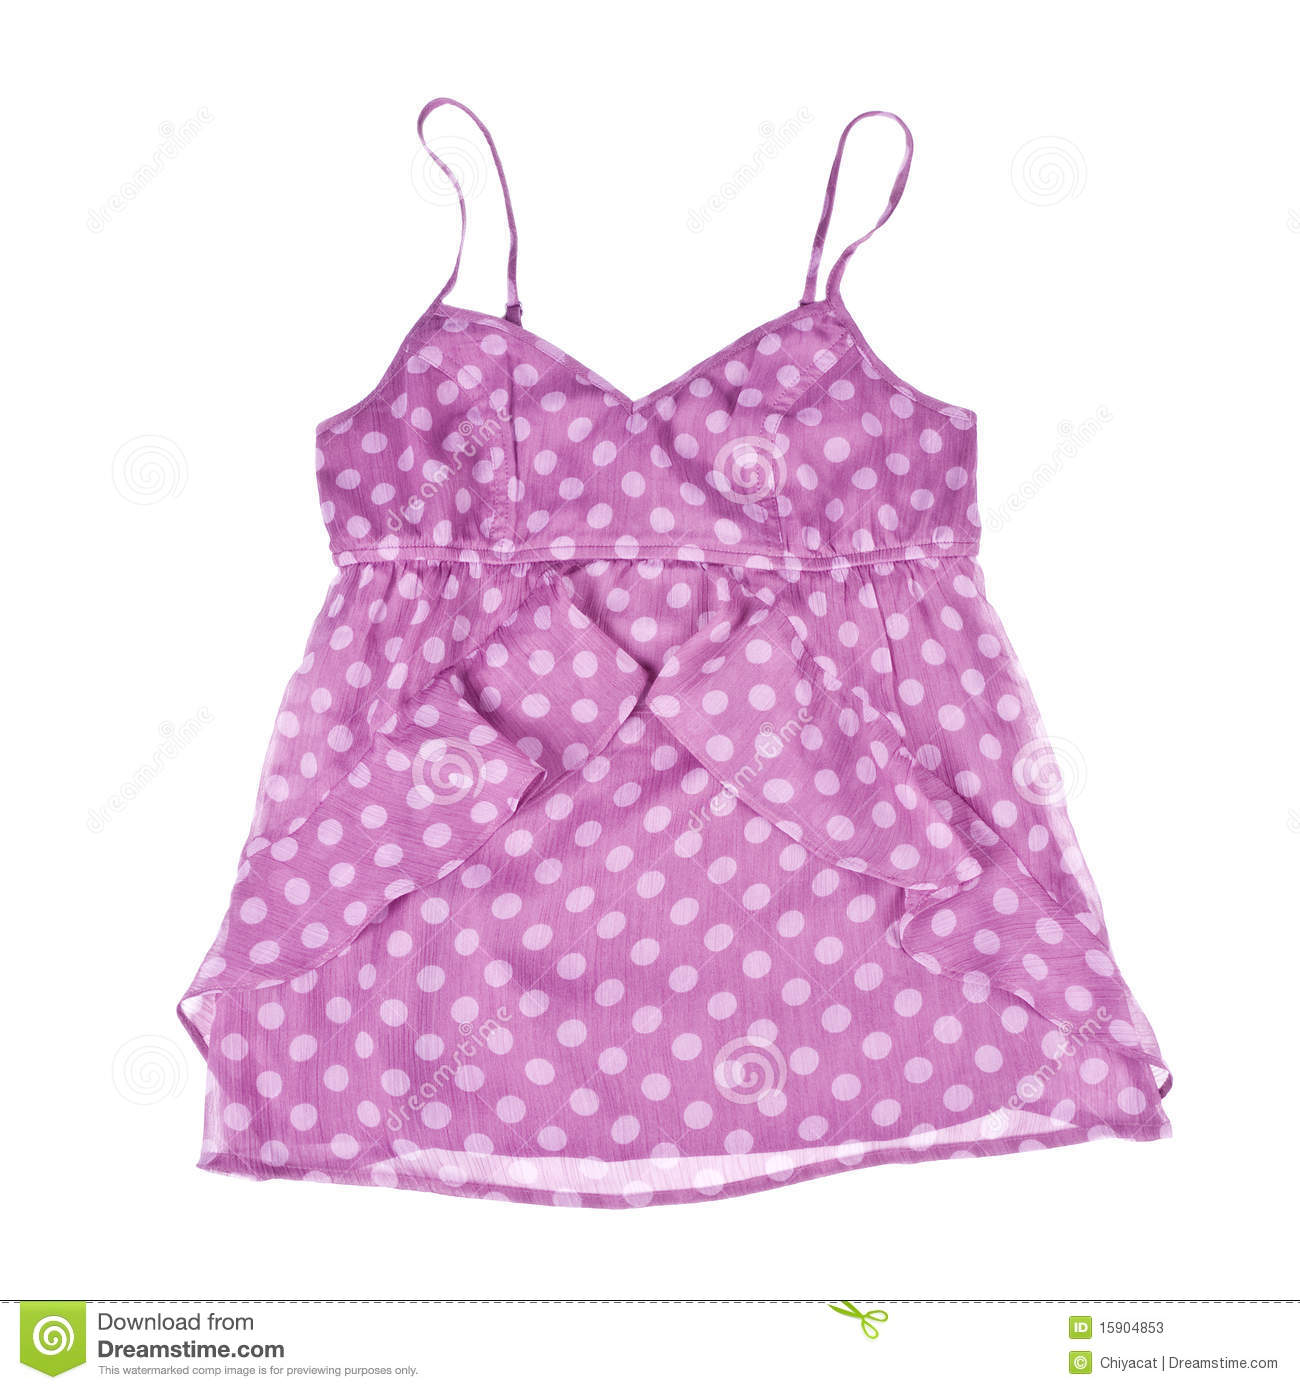     Similar Stock Images Of   Pink Polka Dot Tank Top Isolated On White